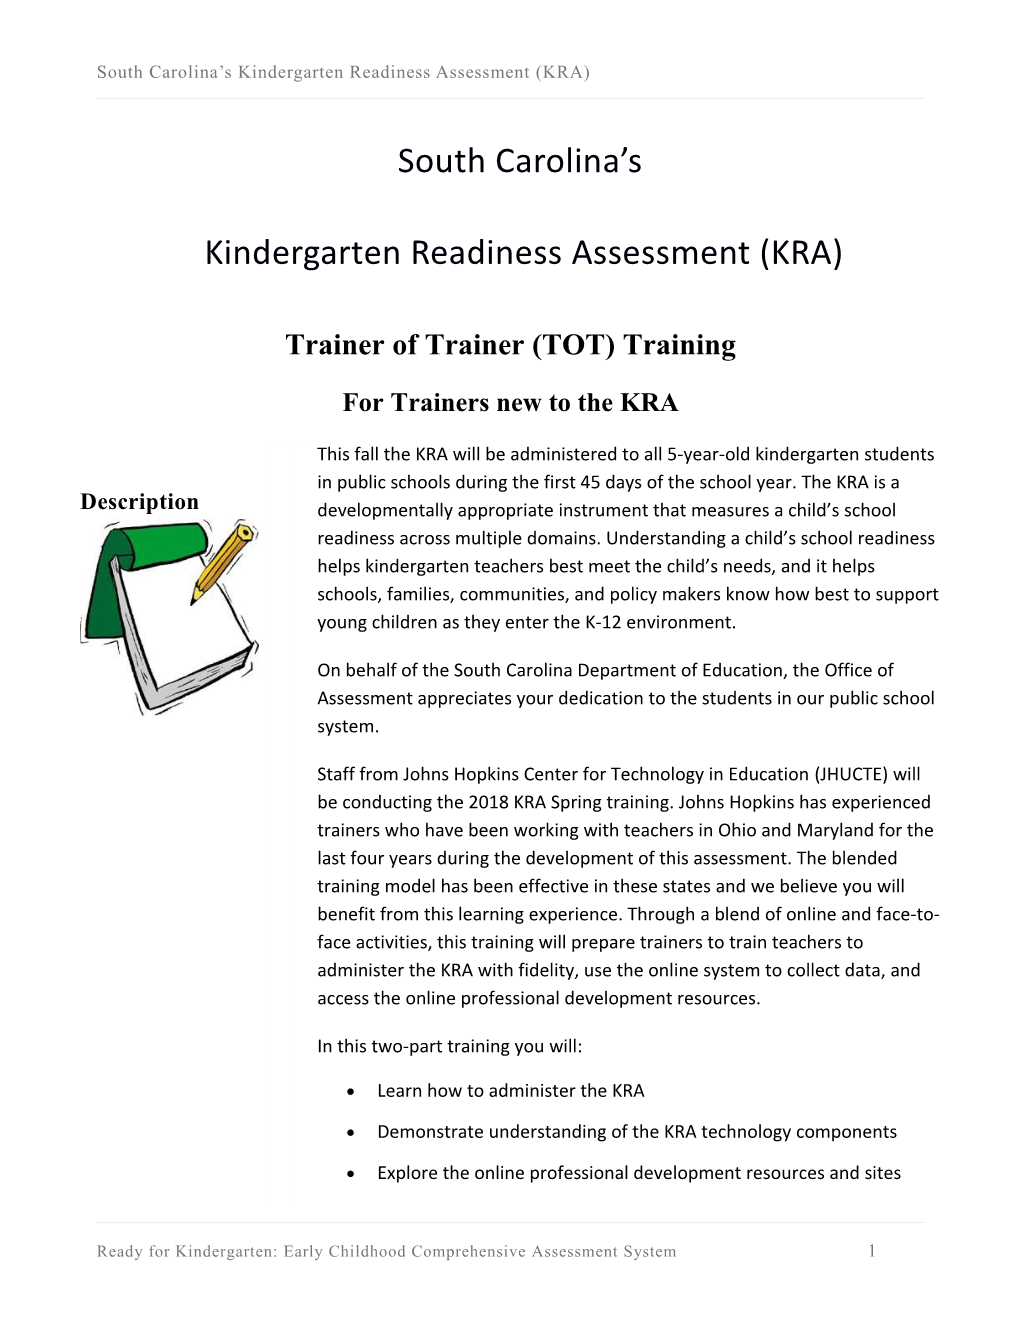 Tennessee S Kindergarten Entry Inventory (KEI) Field Test Training of Trainers (Tot) Training